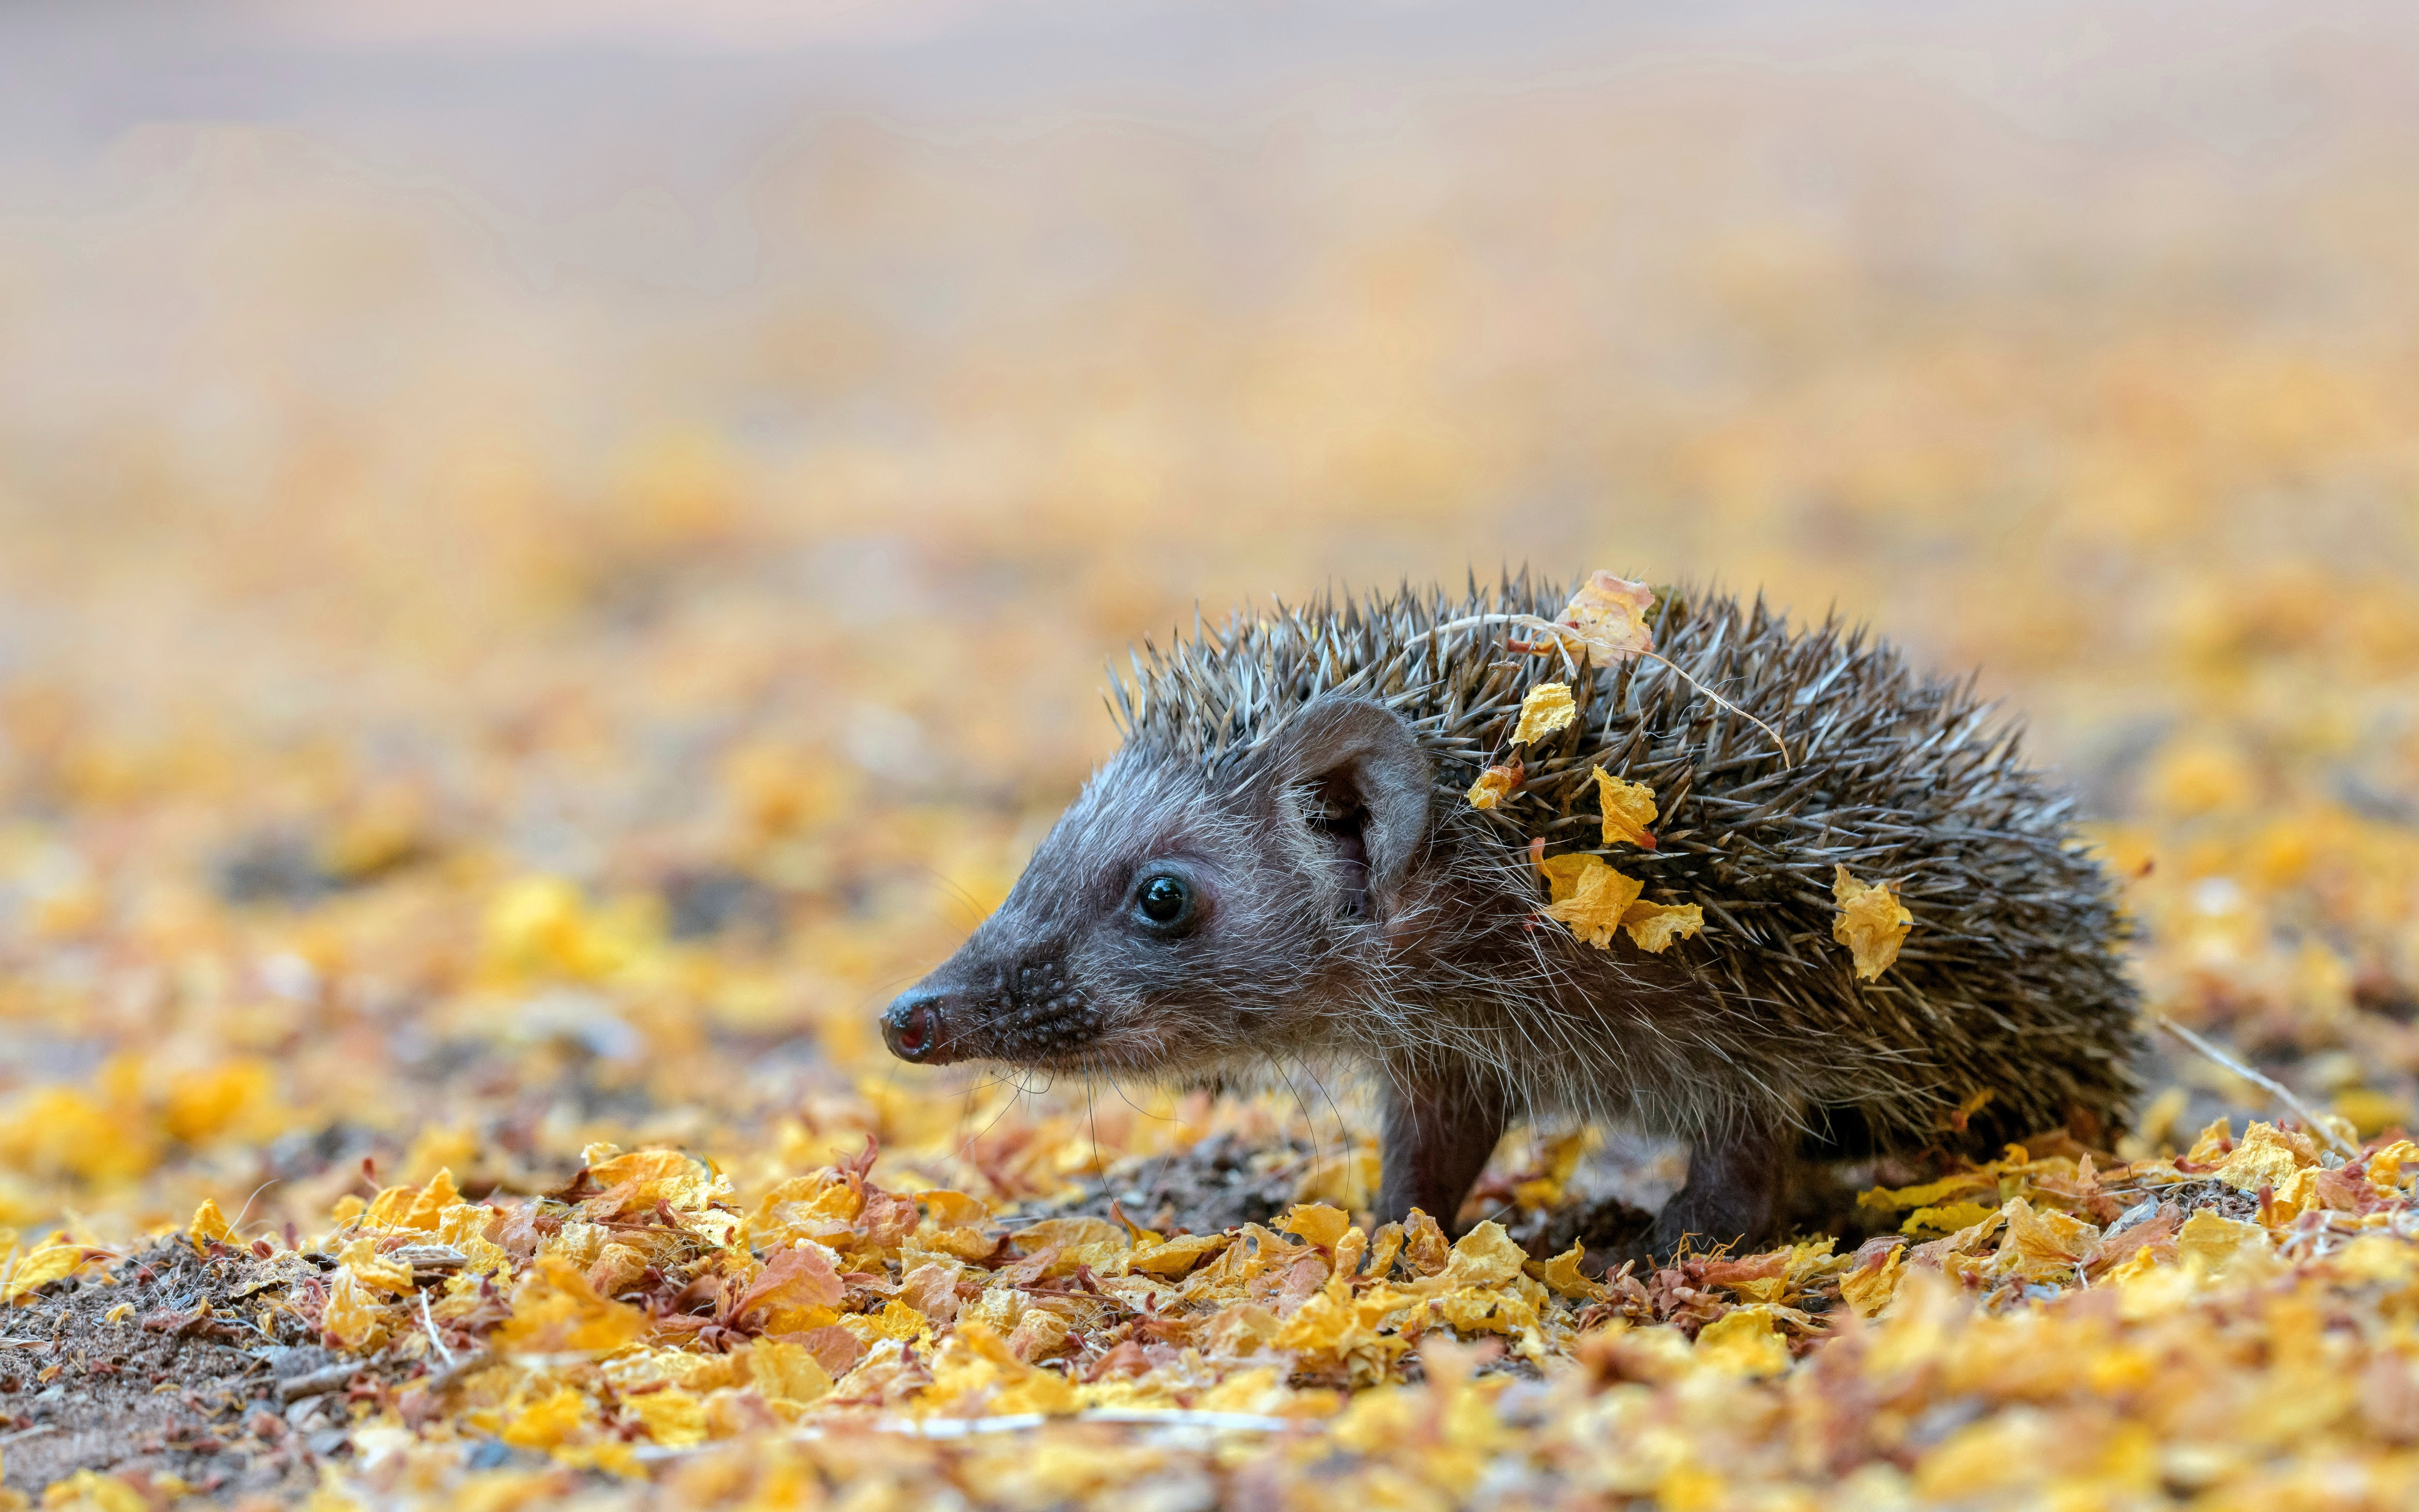 General 4678x2924 animals hedgehog nature outdoors blurred blurry background leaves fallen leaves fall mammals closeup